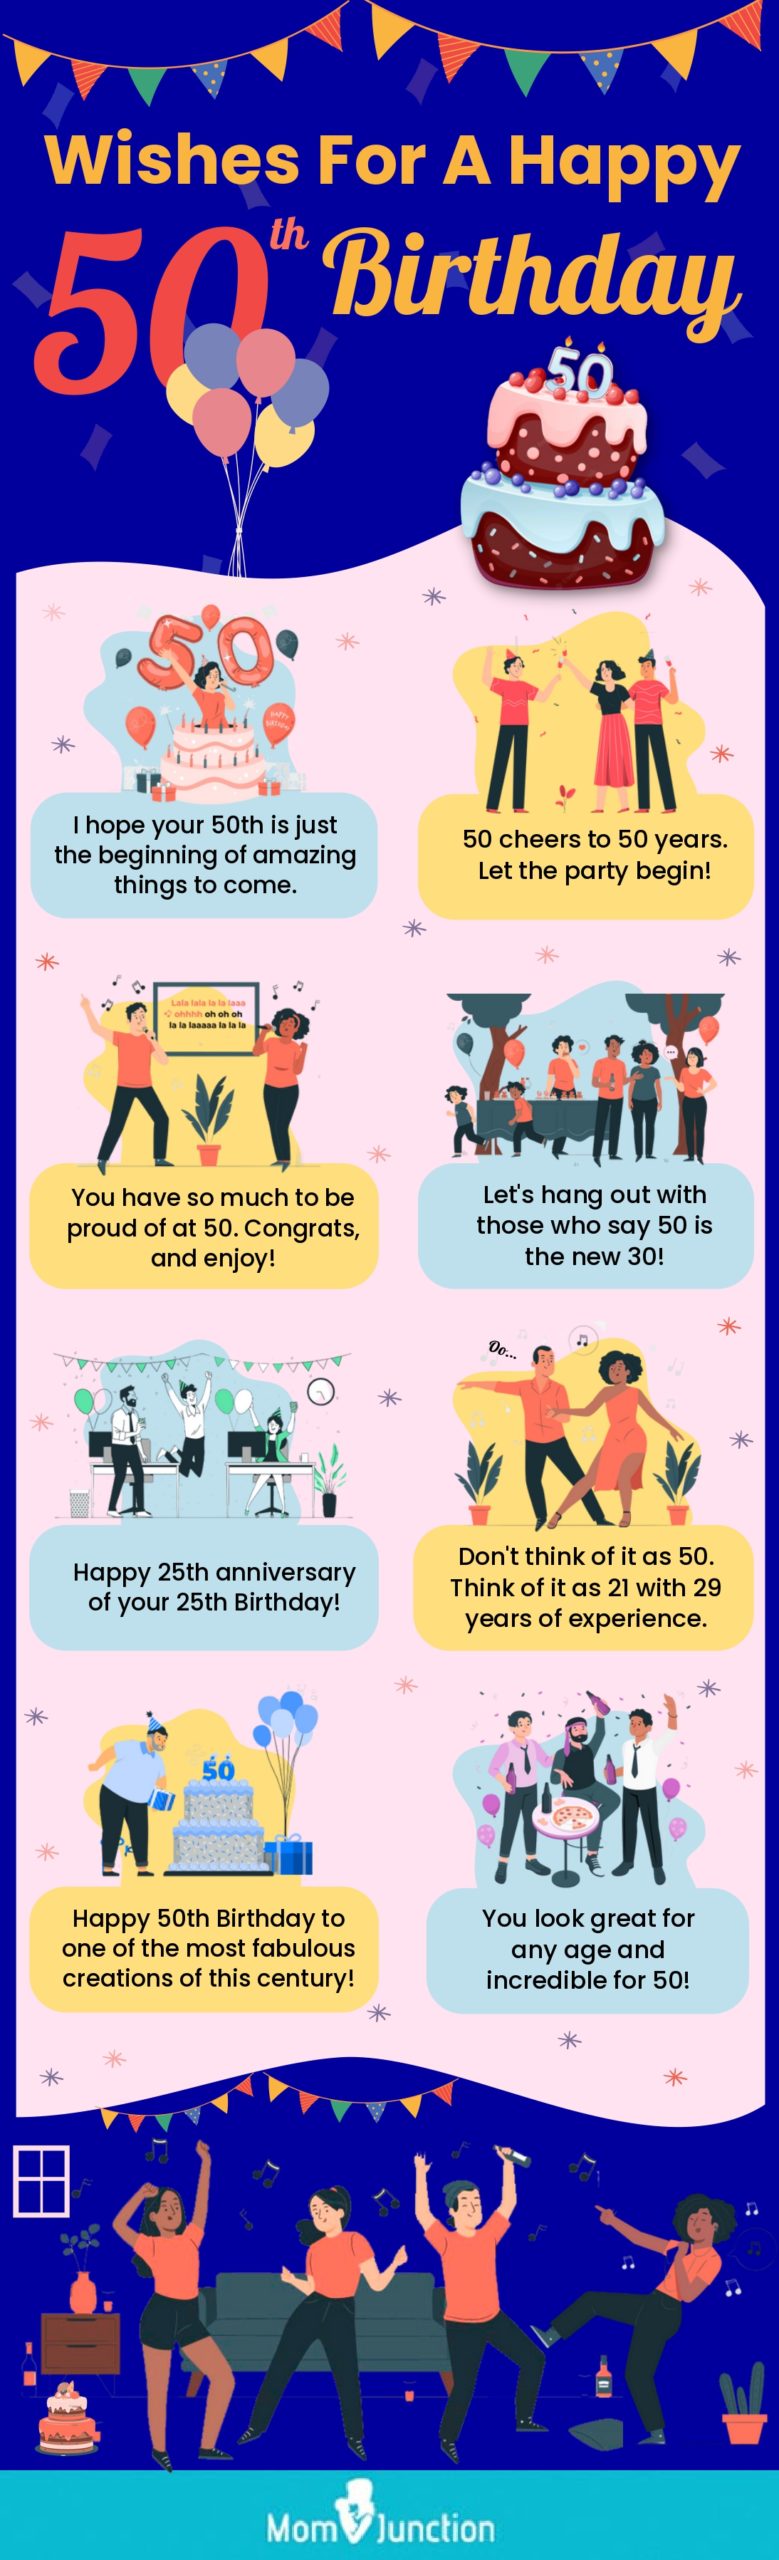 50th birthday wishes [infographic]